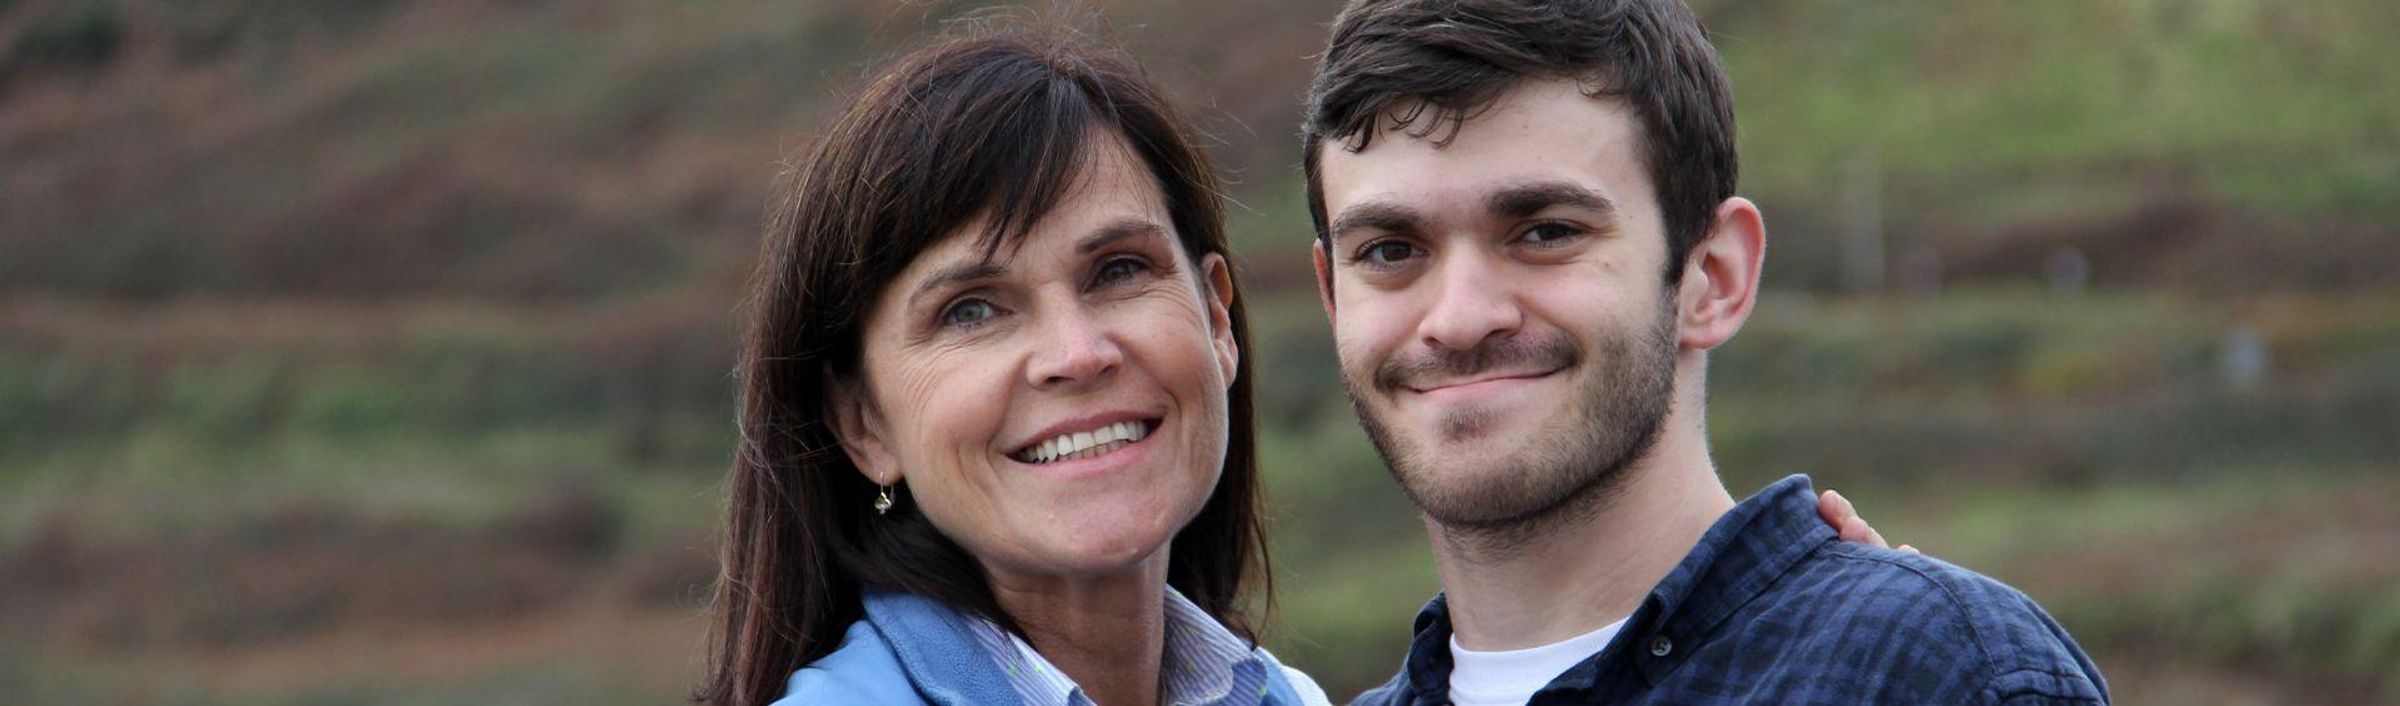 Pictured above: Jane Smith, Head of Rare Blood Disorders Public Affairs and Patient Advocacy, with her son Leland Smith.